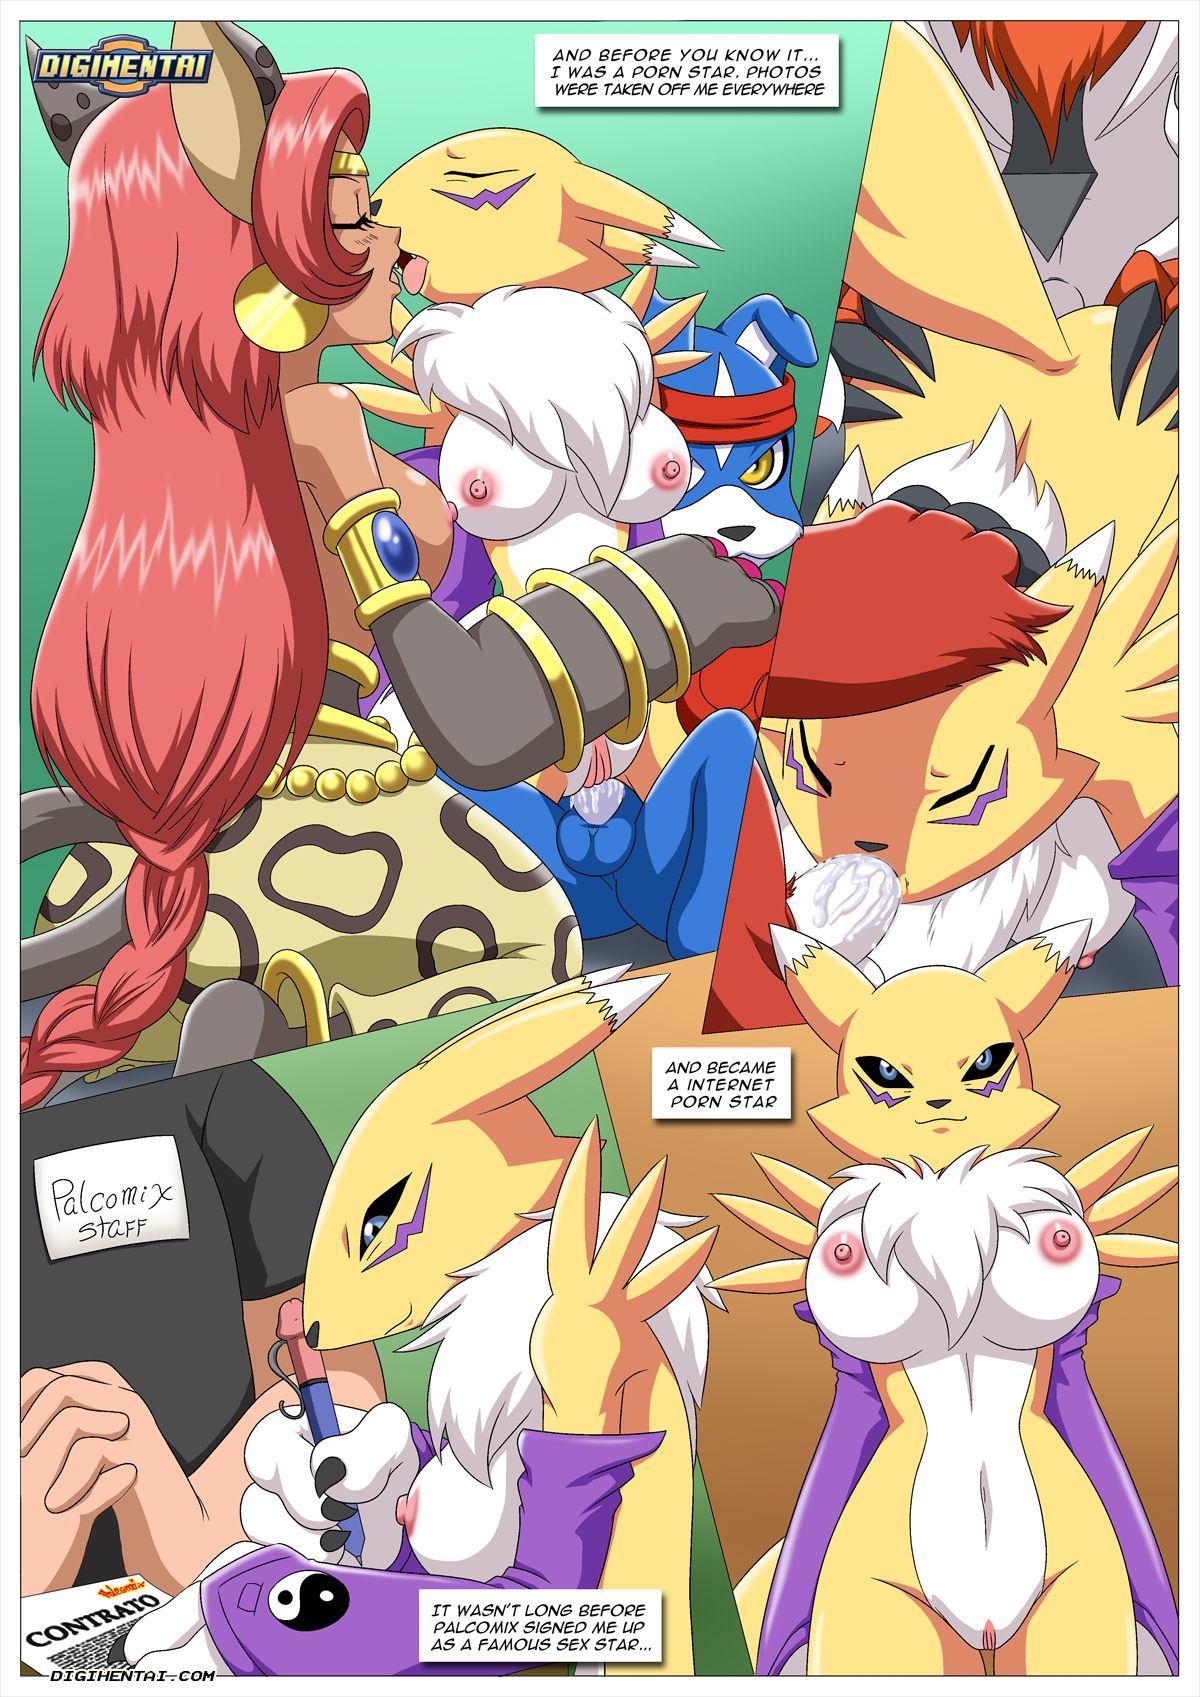 How Renamon Became A Sex Idol (Digimon) by Palcomix page 9